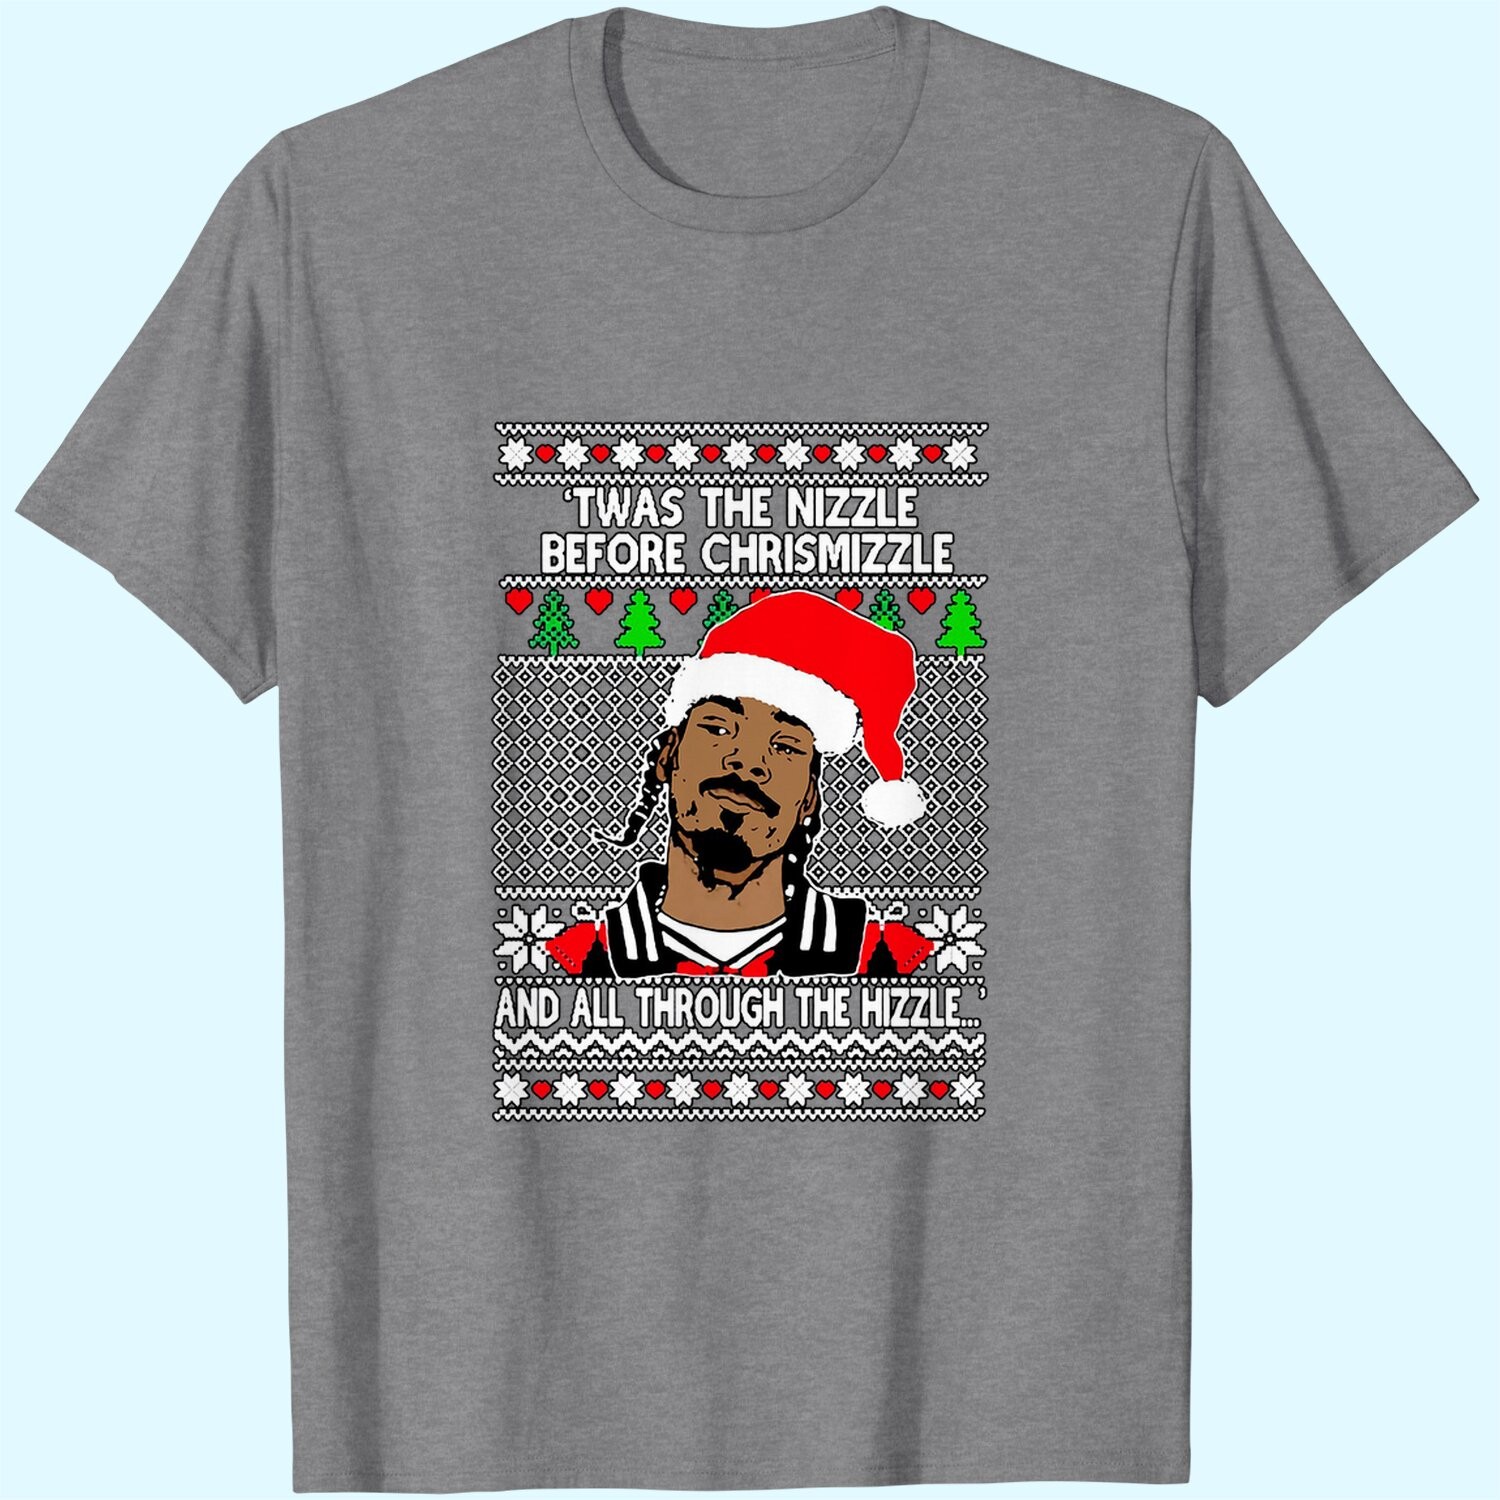 Snoop Dogg ‘Twas The Nizzle Before Chrismizzle Ugly Christmas Graphic Tee DZT